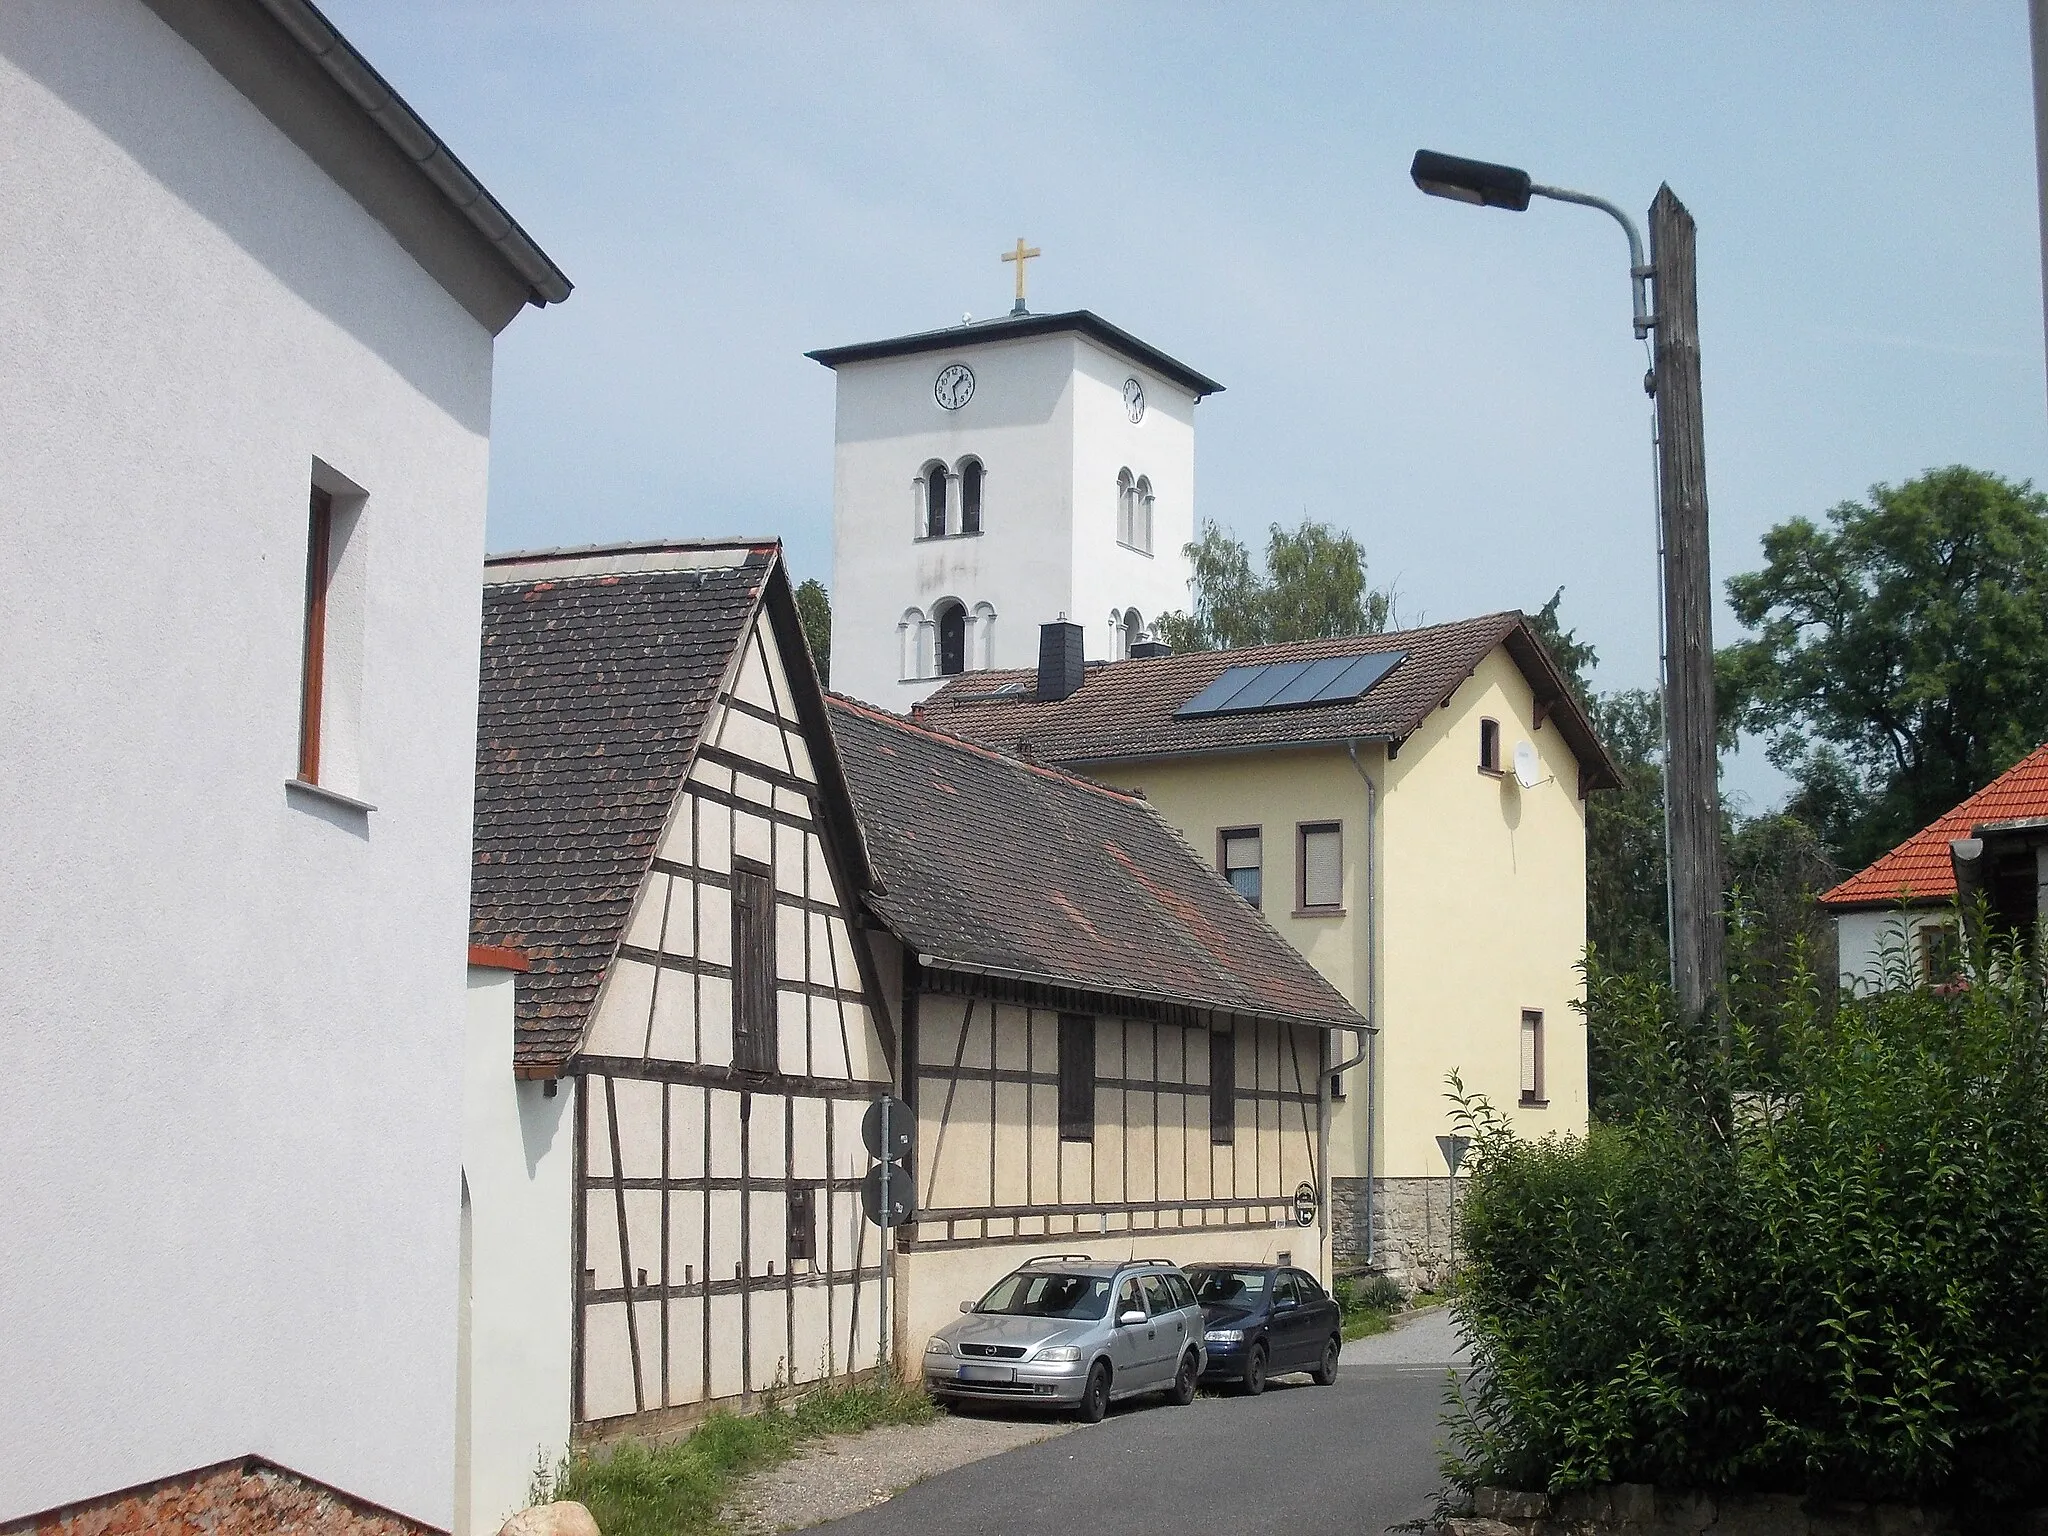 Photo showing: Berggasse in Bad Köstritz (Greiz district, Thuringia) with St. Leonard's Church in the background